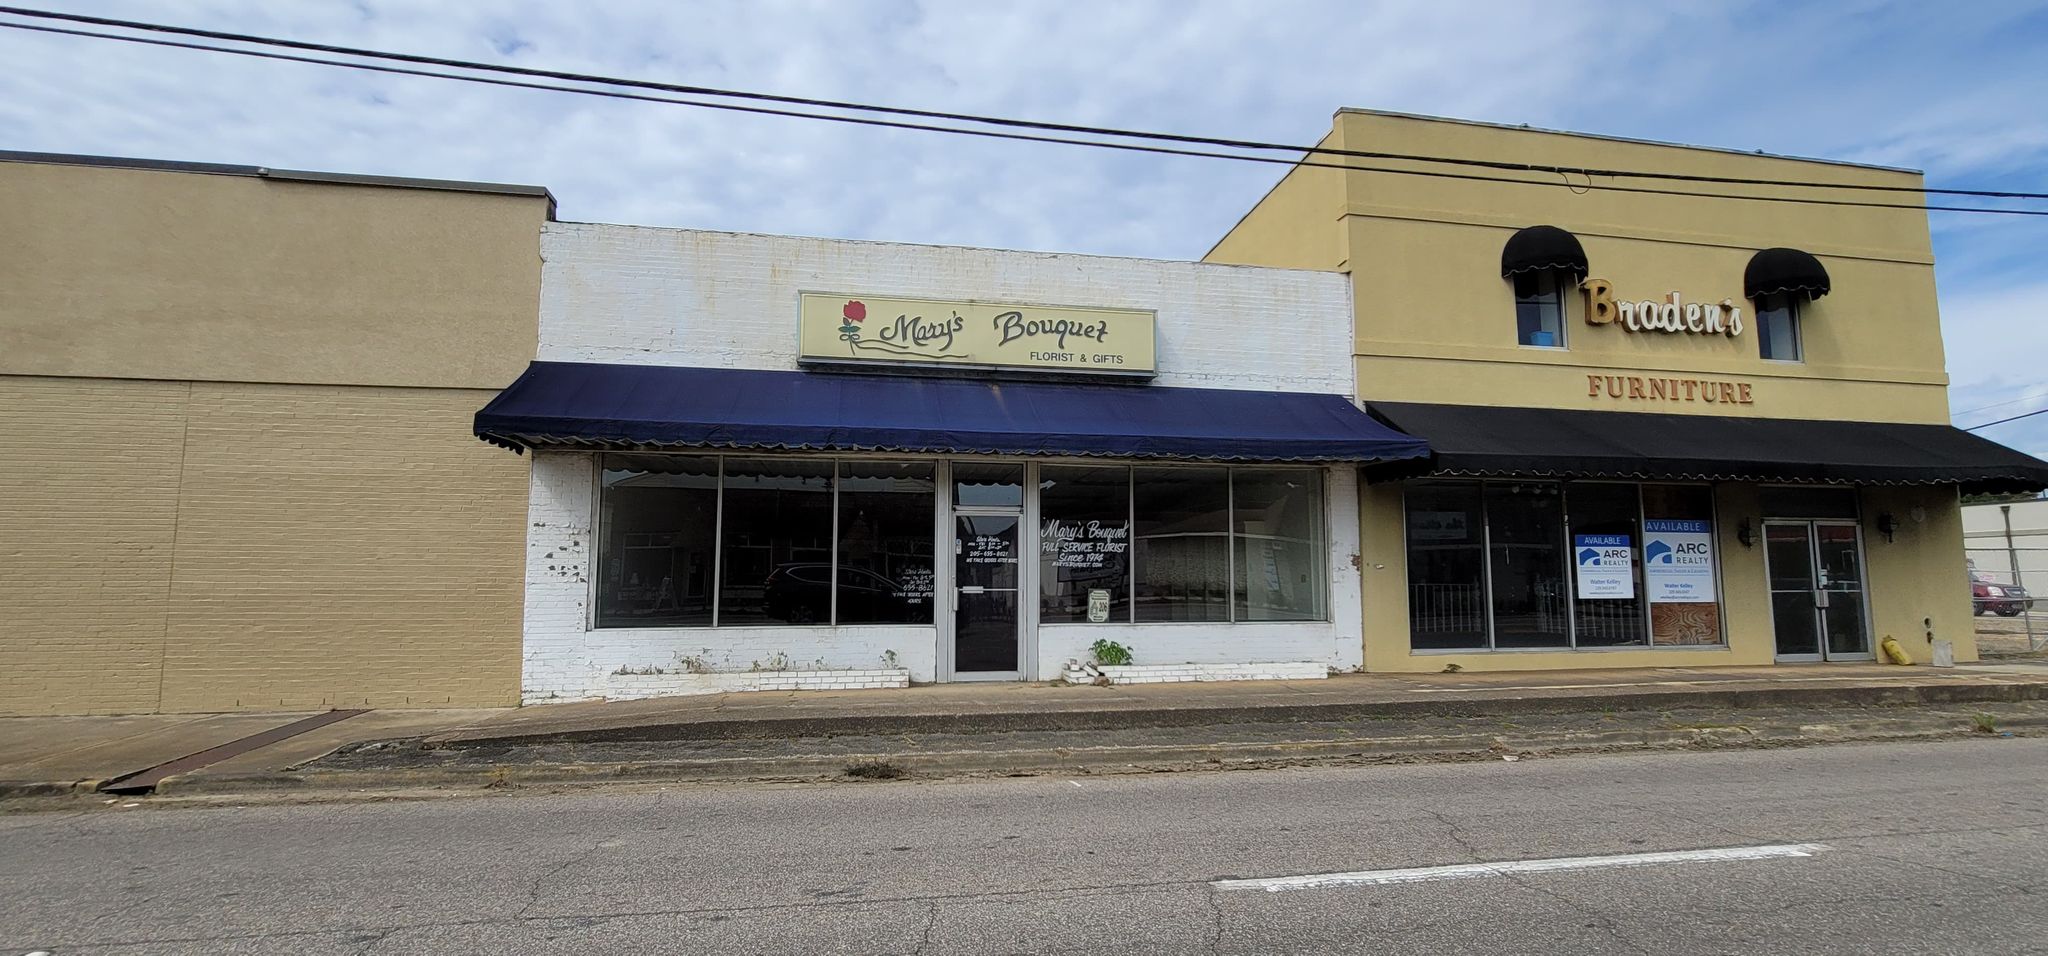 Mary's Bouquet closes after 4 decades in Trussville